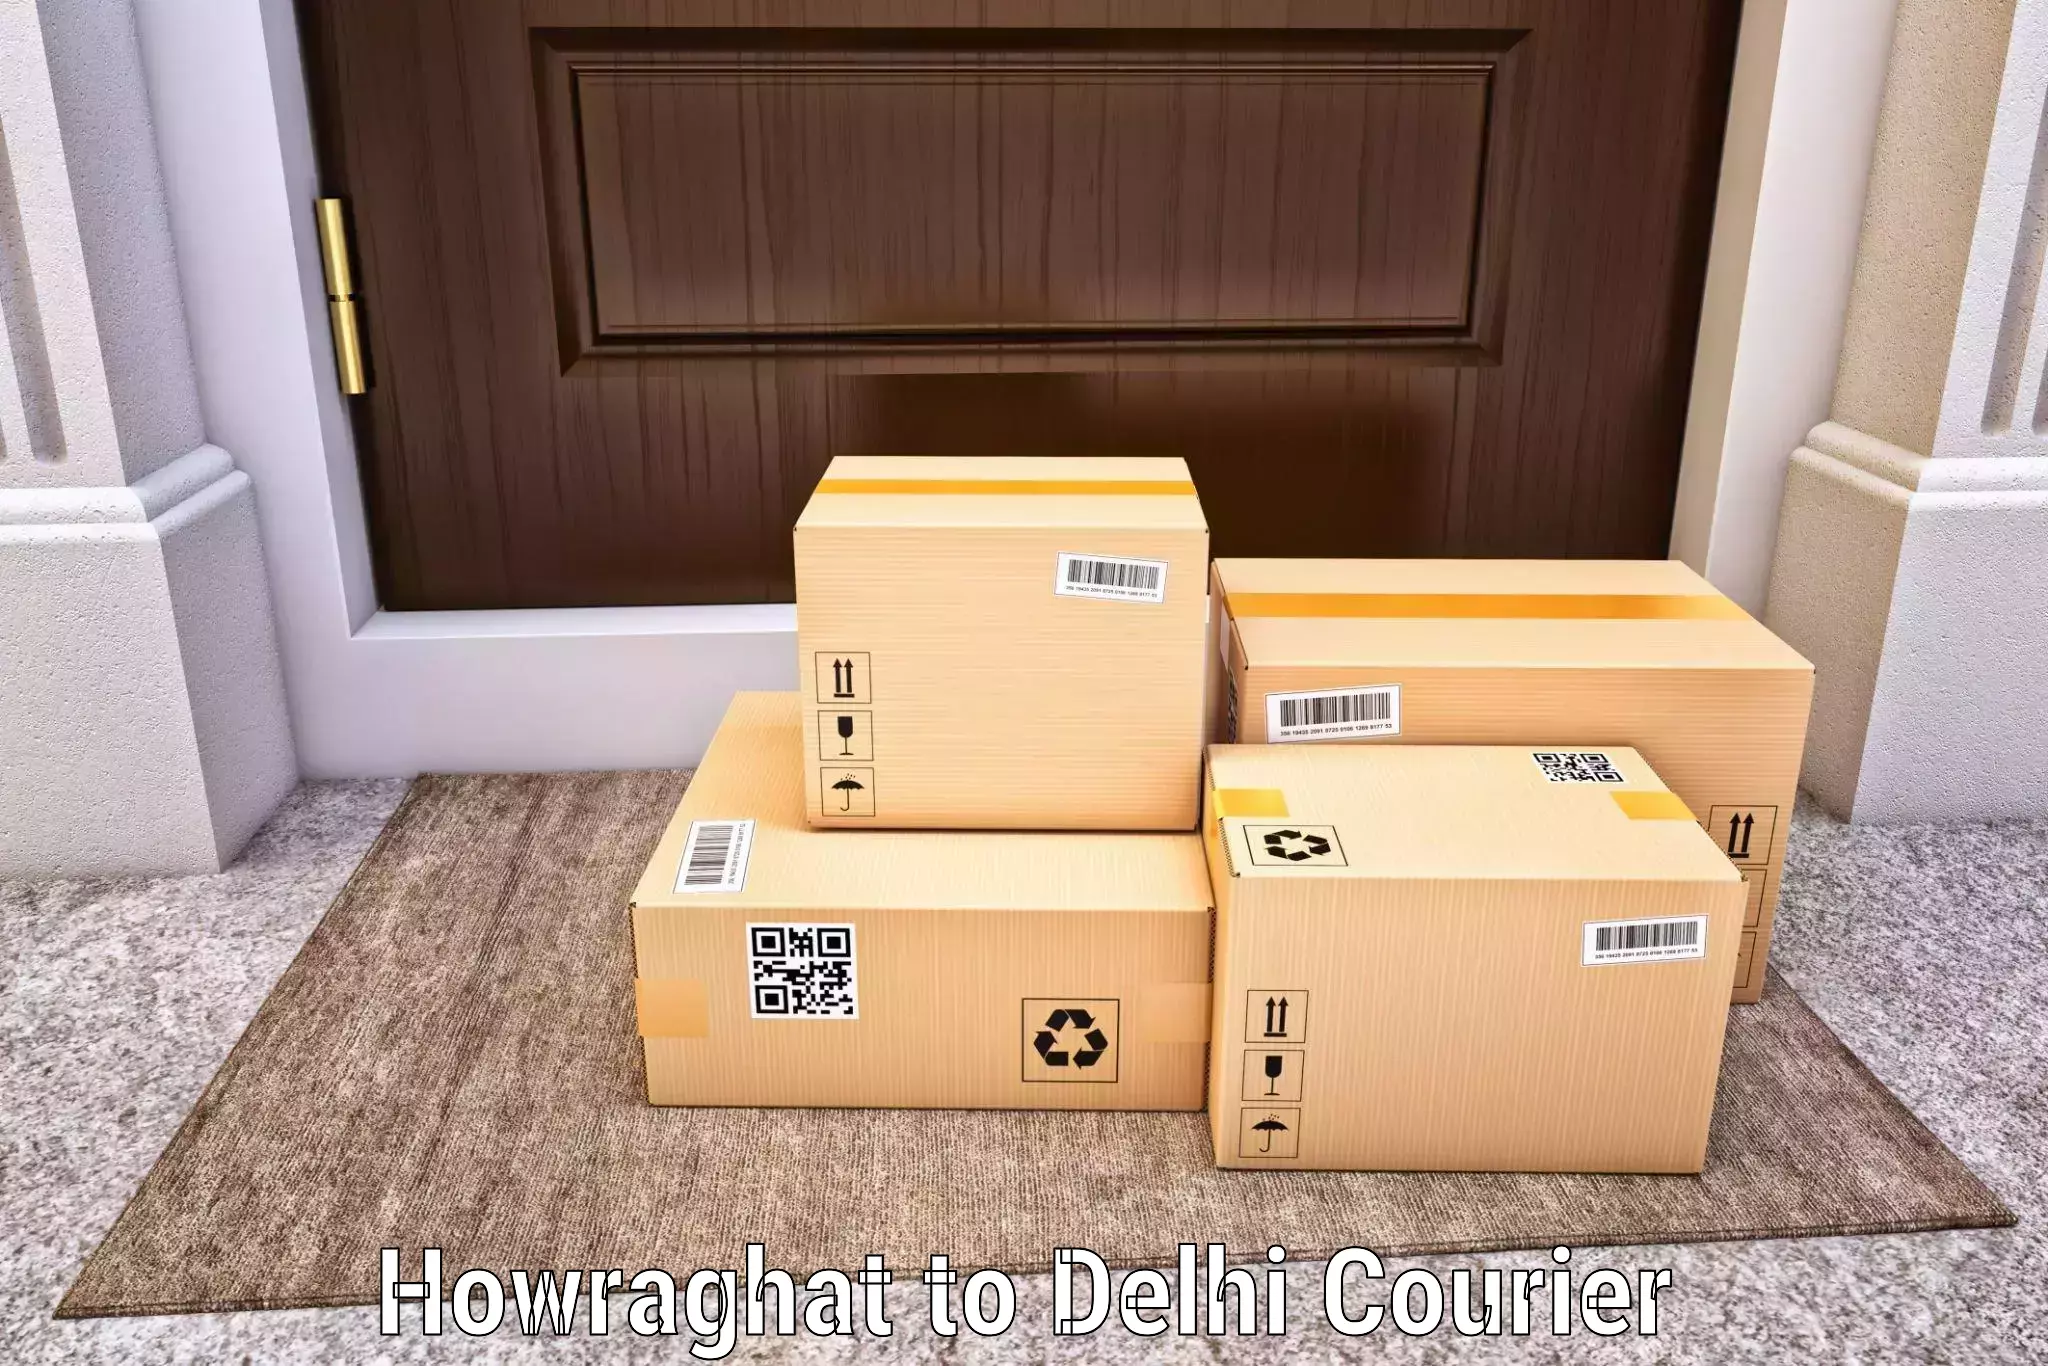 Nationwide courier service Howraghat to NCR